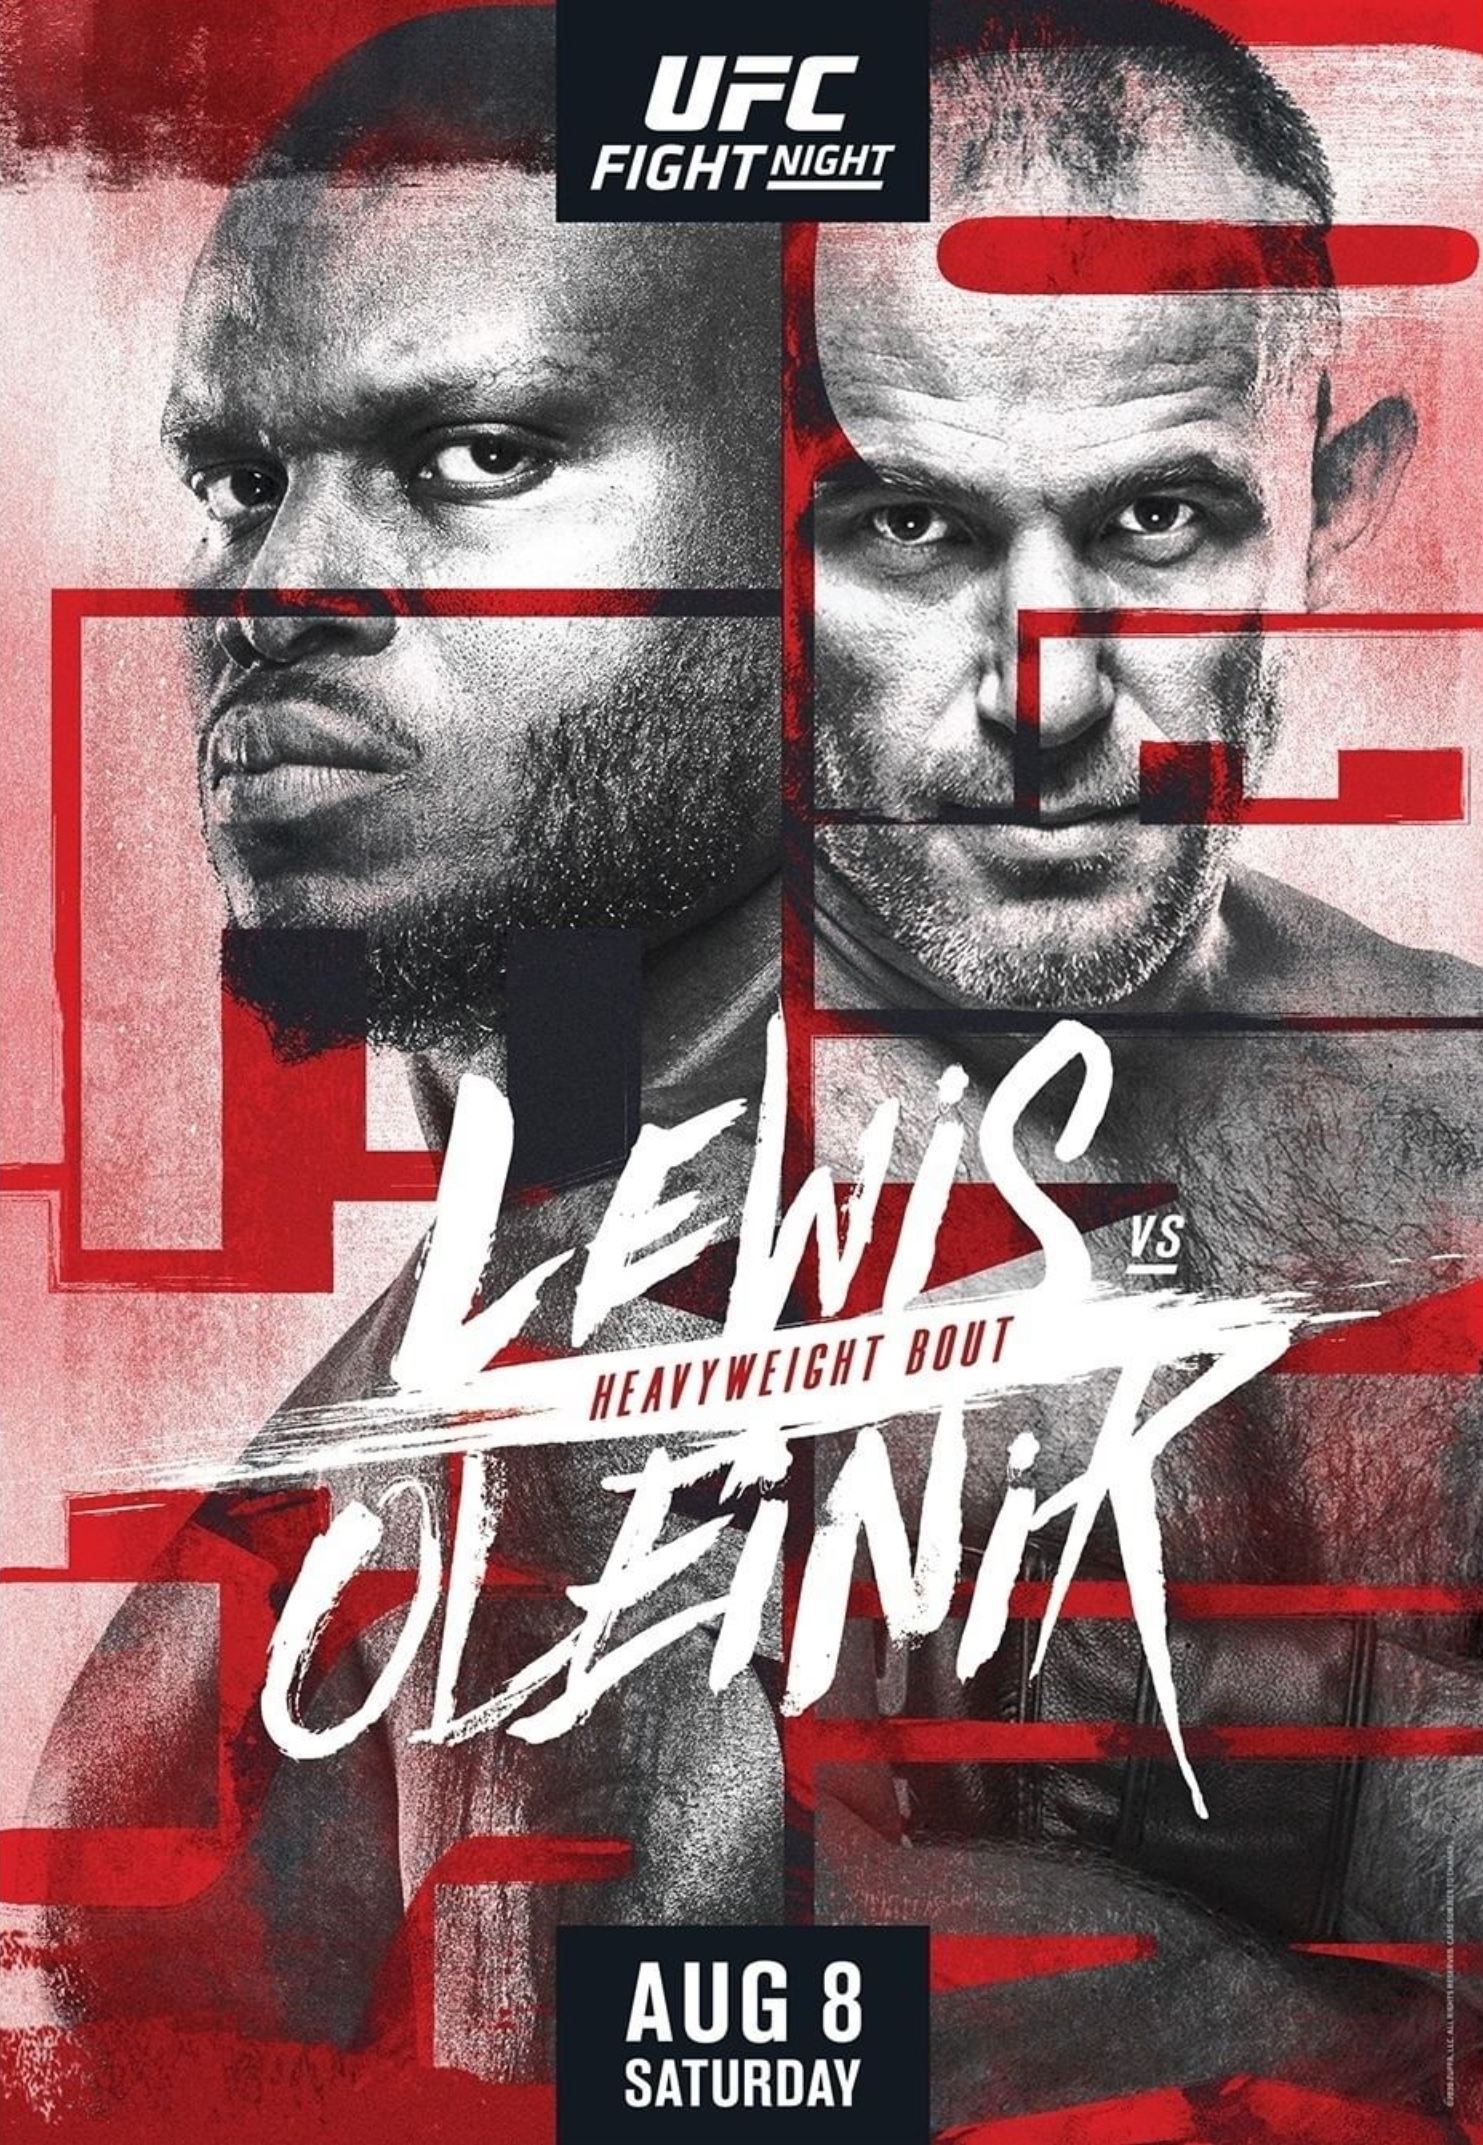 UFC Fight Night: Lewis vs Oleinik Fighter Salaries & Incentive Pay